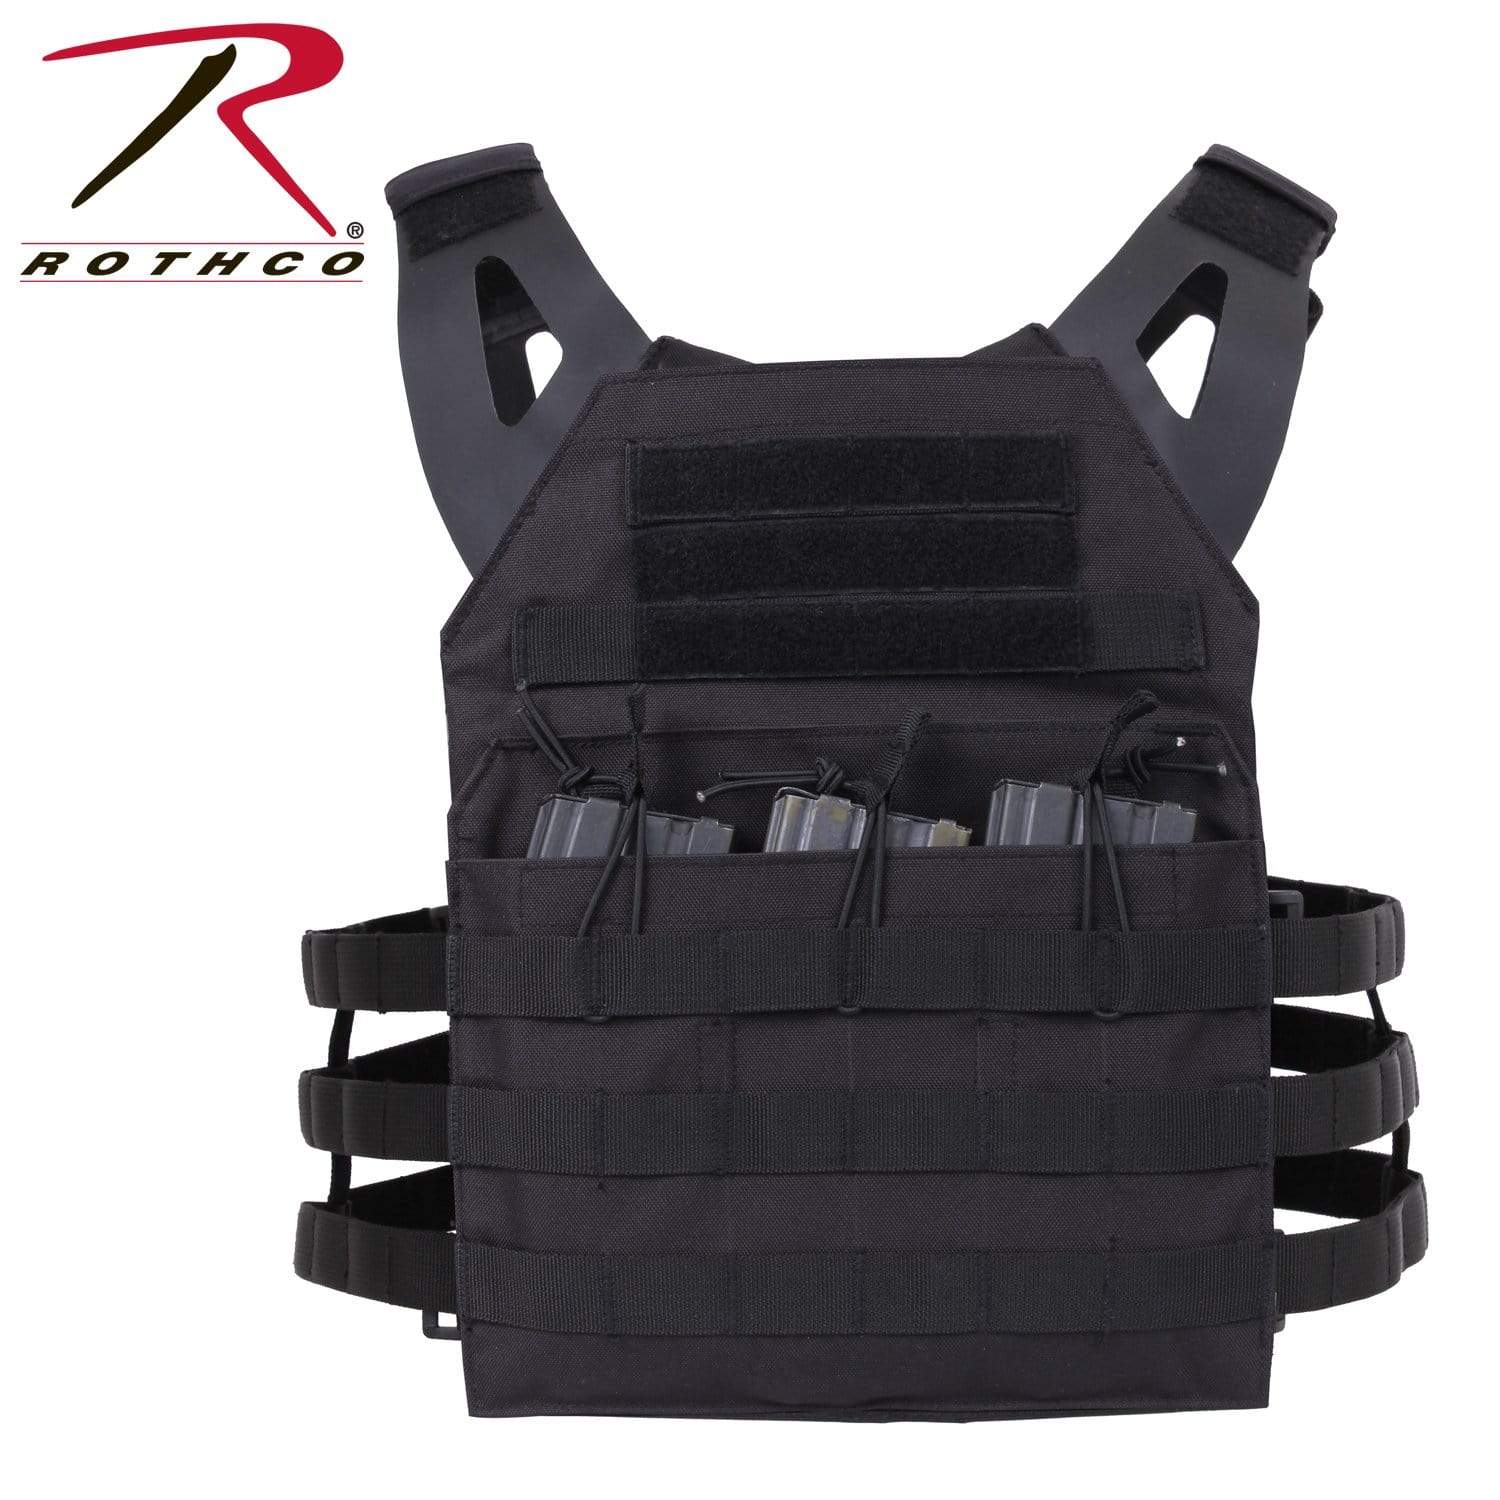 Rothco Lightweight Armor Plate Carrier Vest - Eminent Paintball And Airsoft